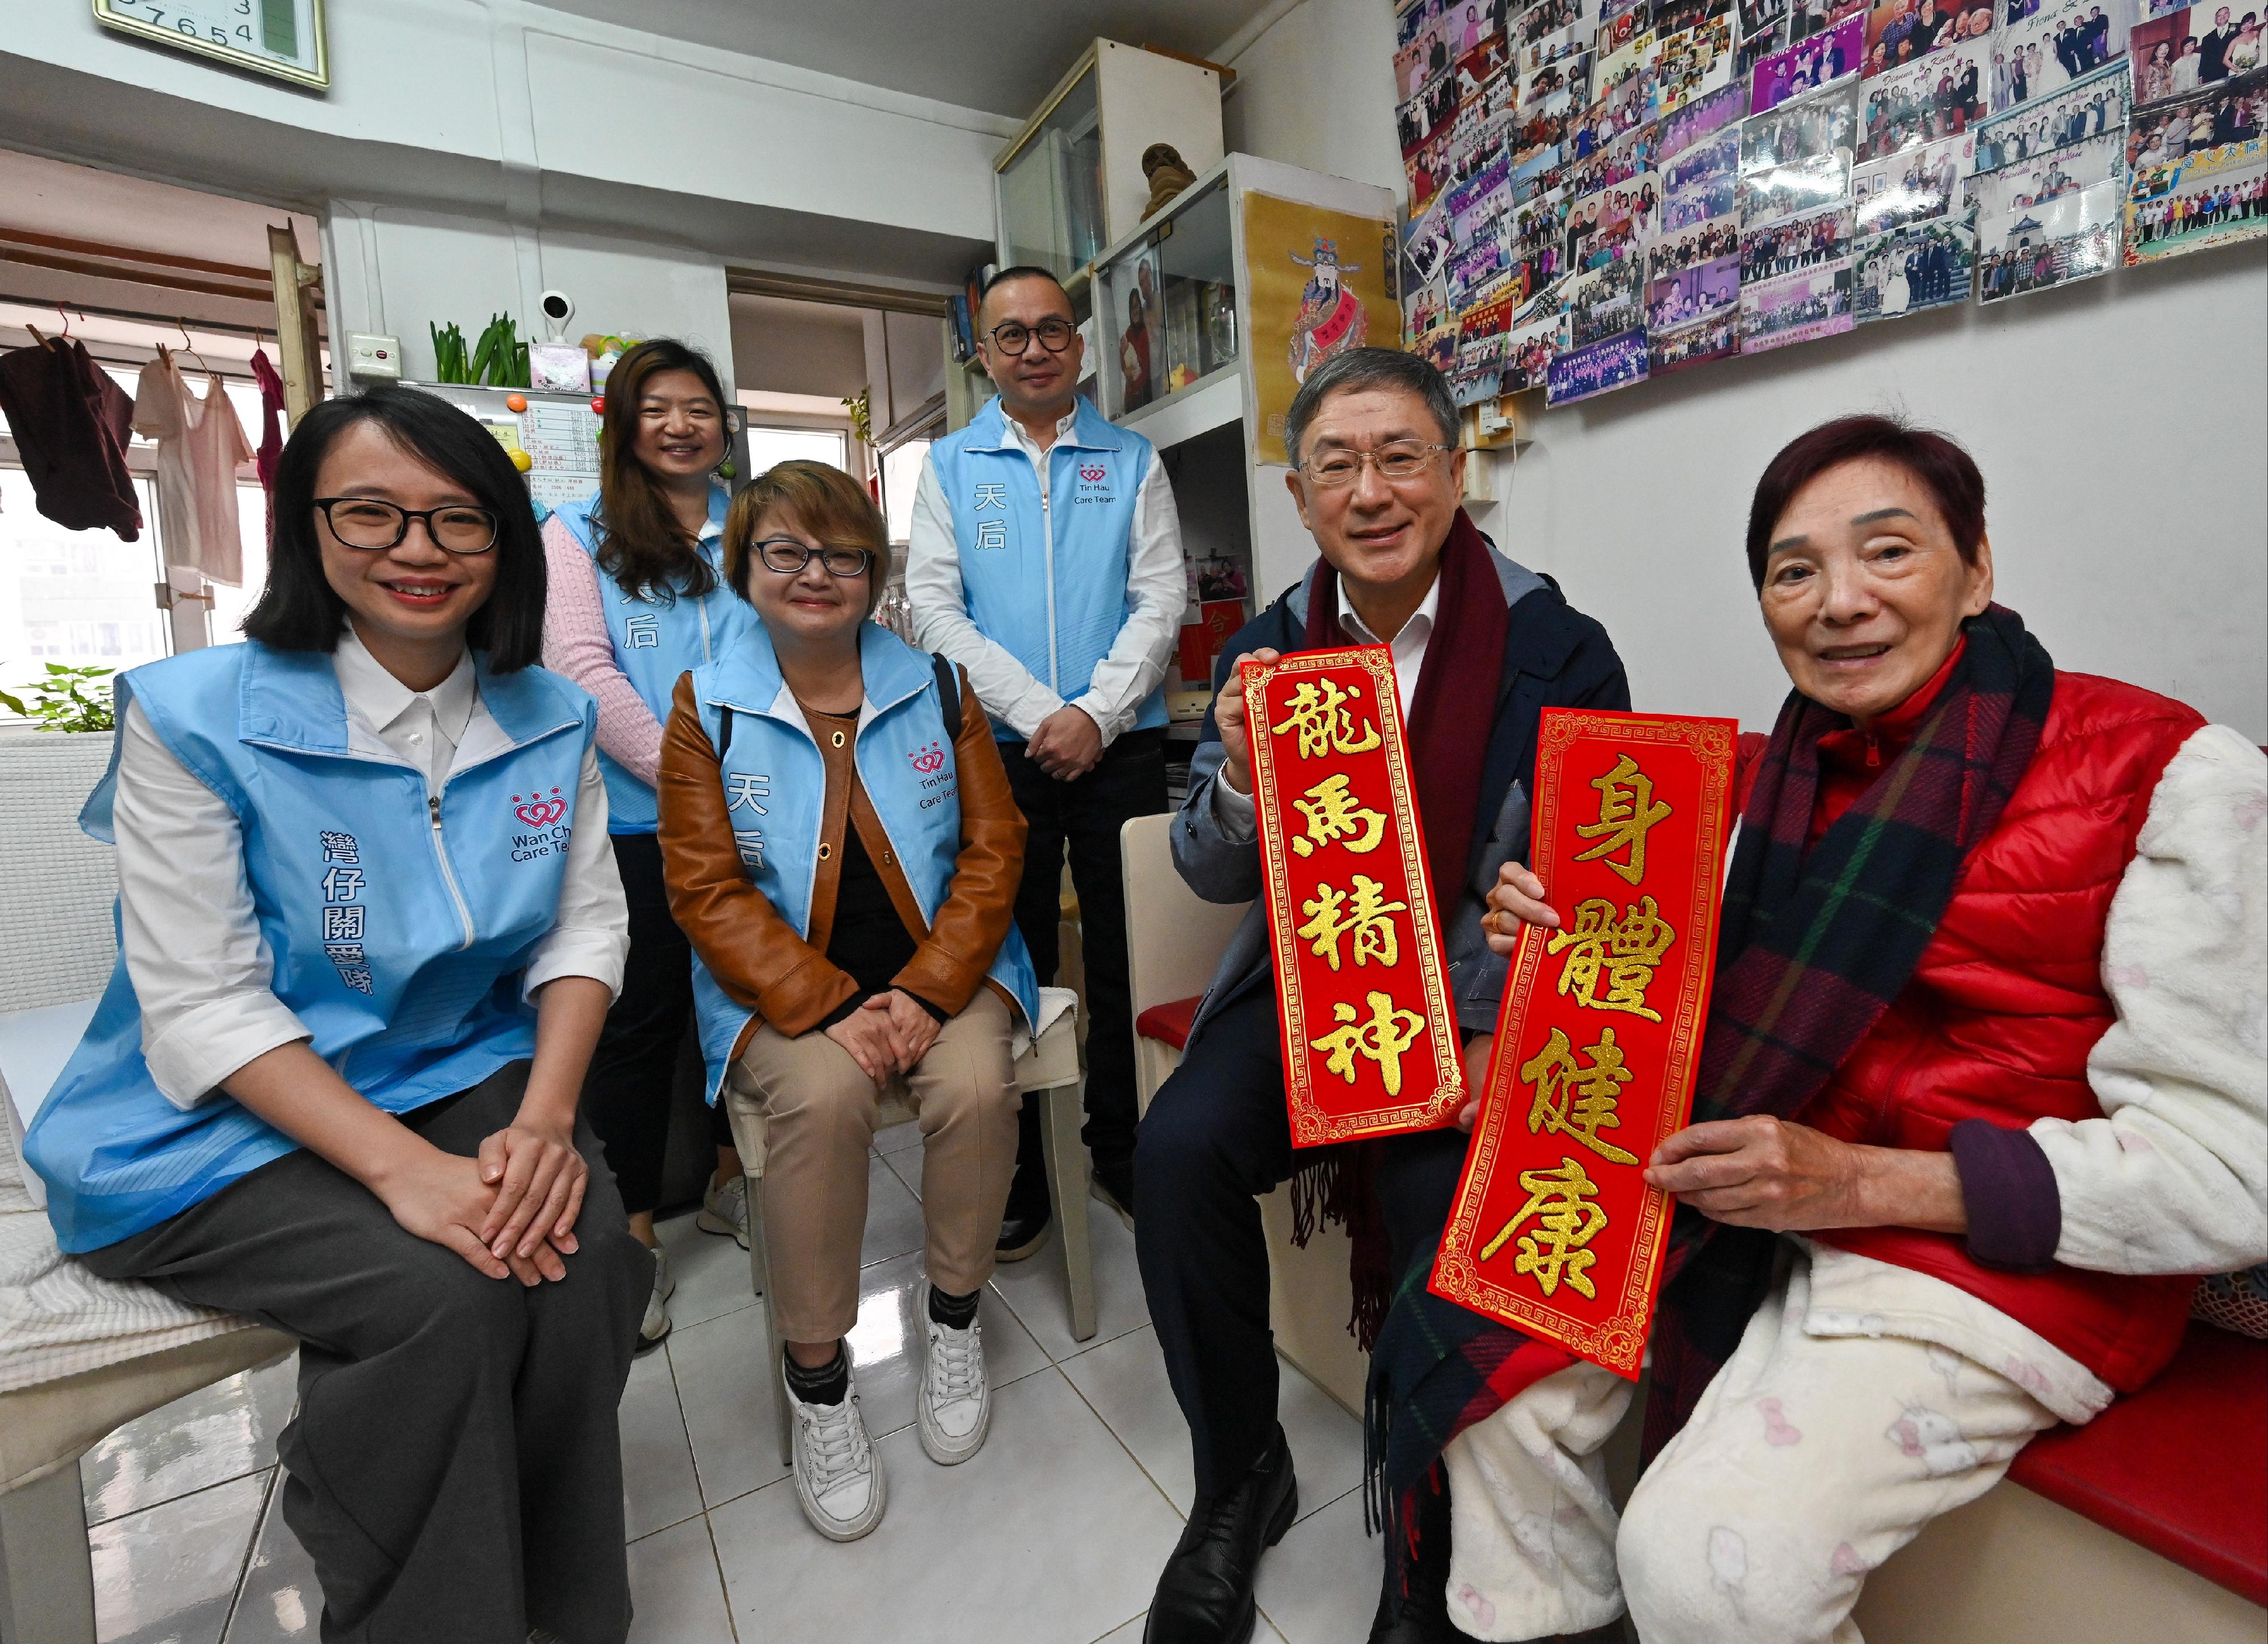 The Deputy Chief Secretary for Administration, Mr Cheuk Wing-hing (second right), today (February 8) visited elderly households living in Lai Tak Tsuen to extend his care and regards, and share with them the festive joy. Joining Mr Cheuk are the District Officer (Wan Chai), Ms Fanny Cheung (first left), Wan Chai District Council members Ms Lau Pui-shan (second left) and Mr Joey Lee (back row, right) and representatives from the Care Team (Wan Chai).